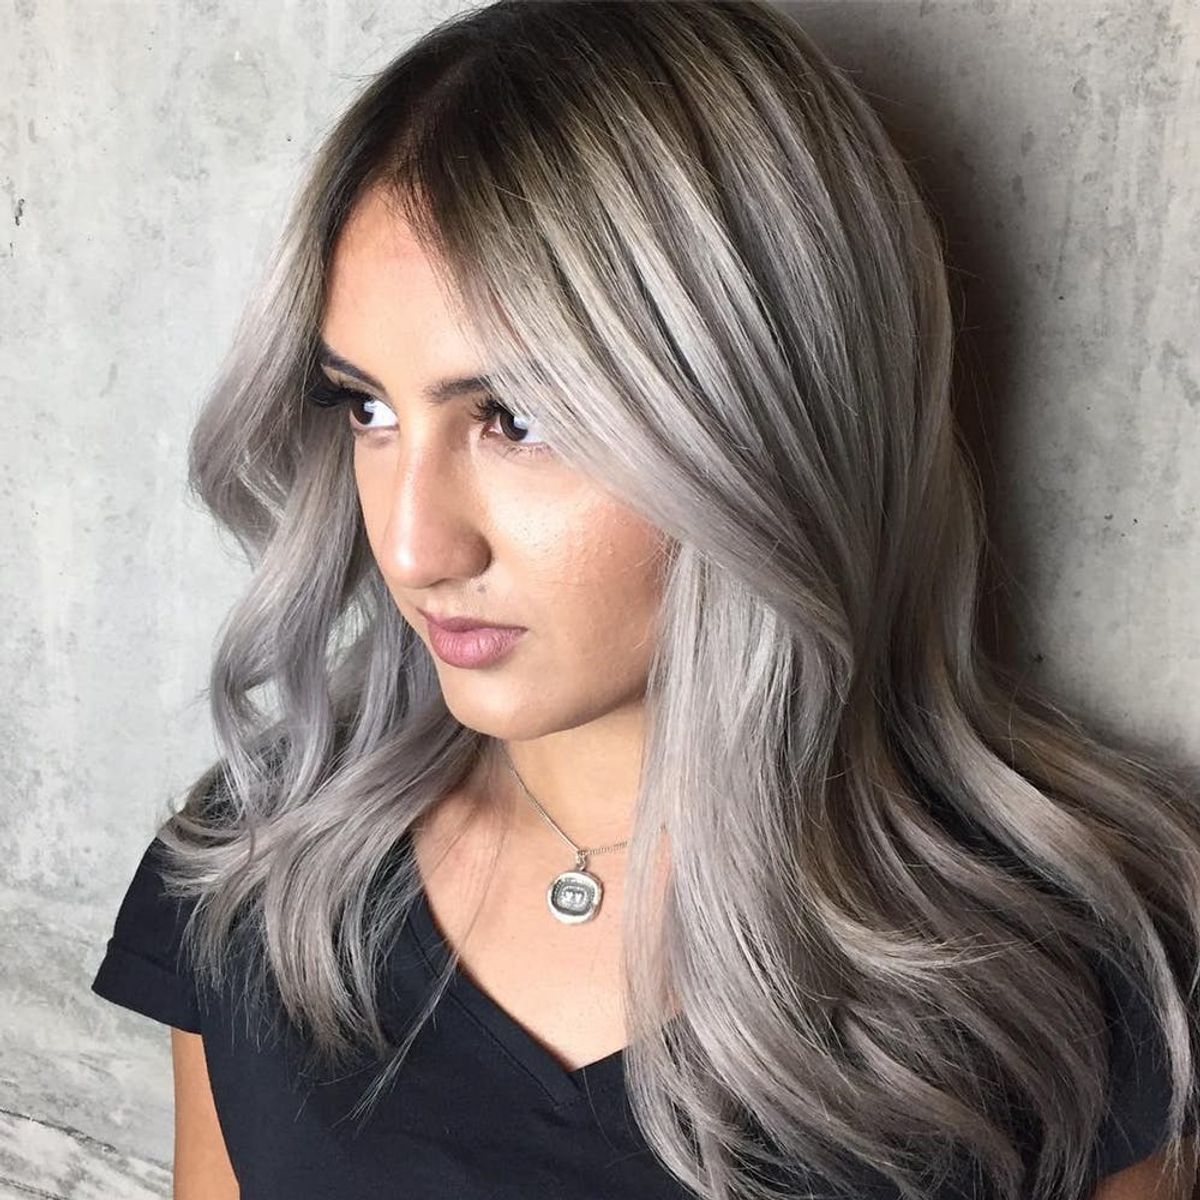 7 Ways to Rock Pantone’s Fall 2016 Colors in Your Hair